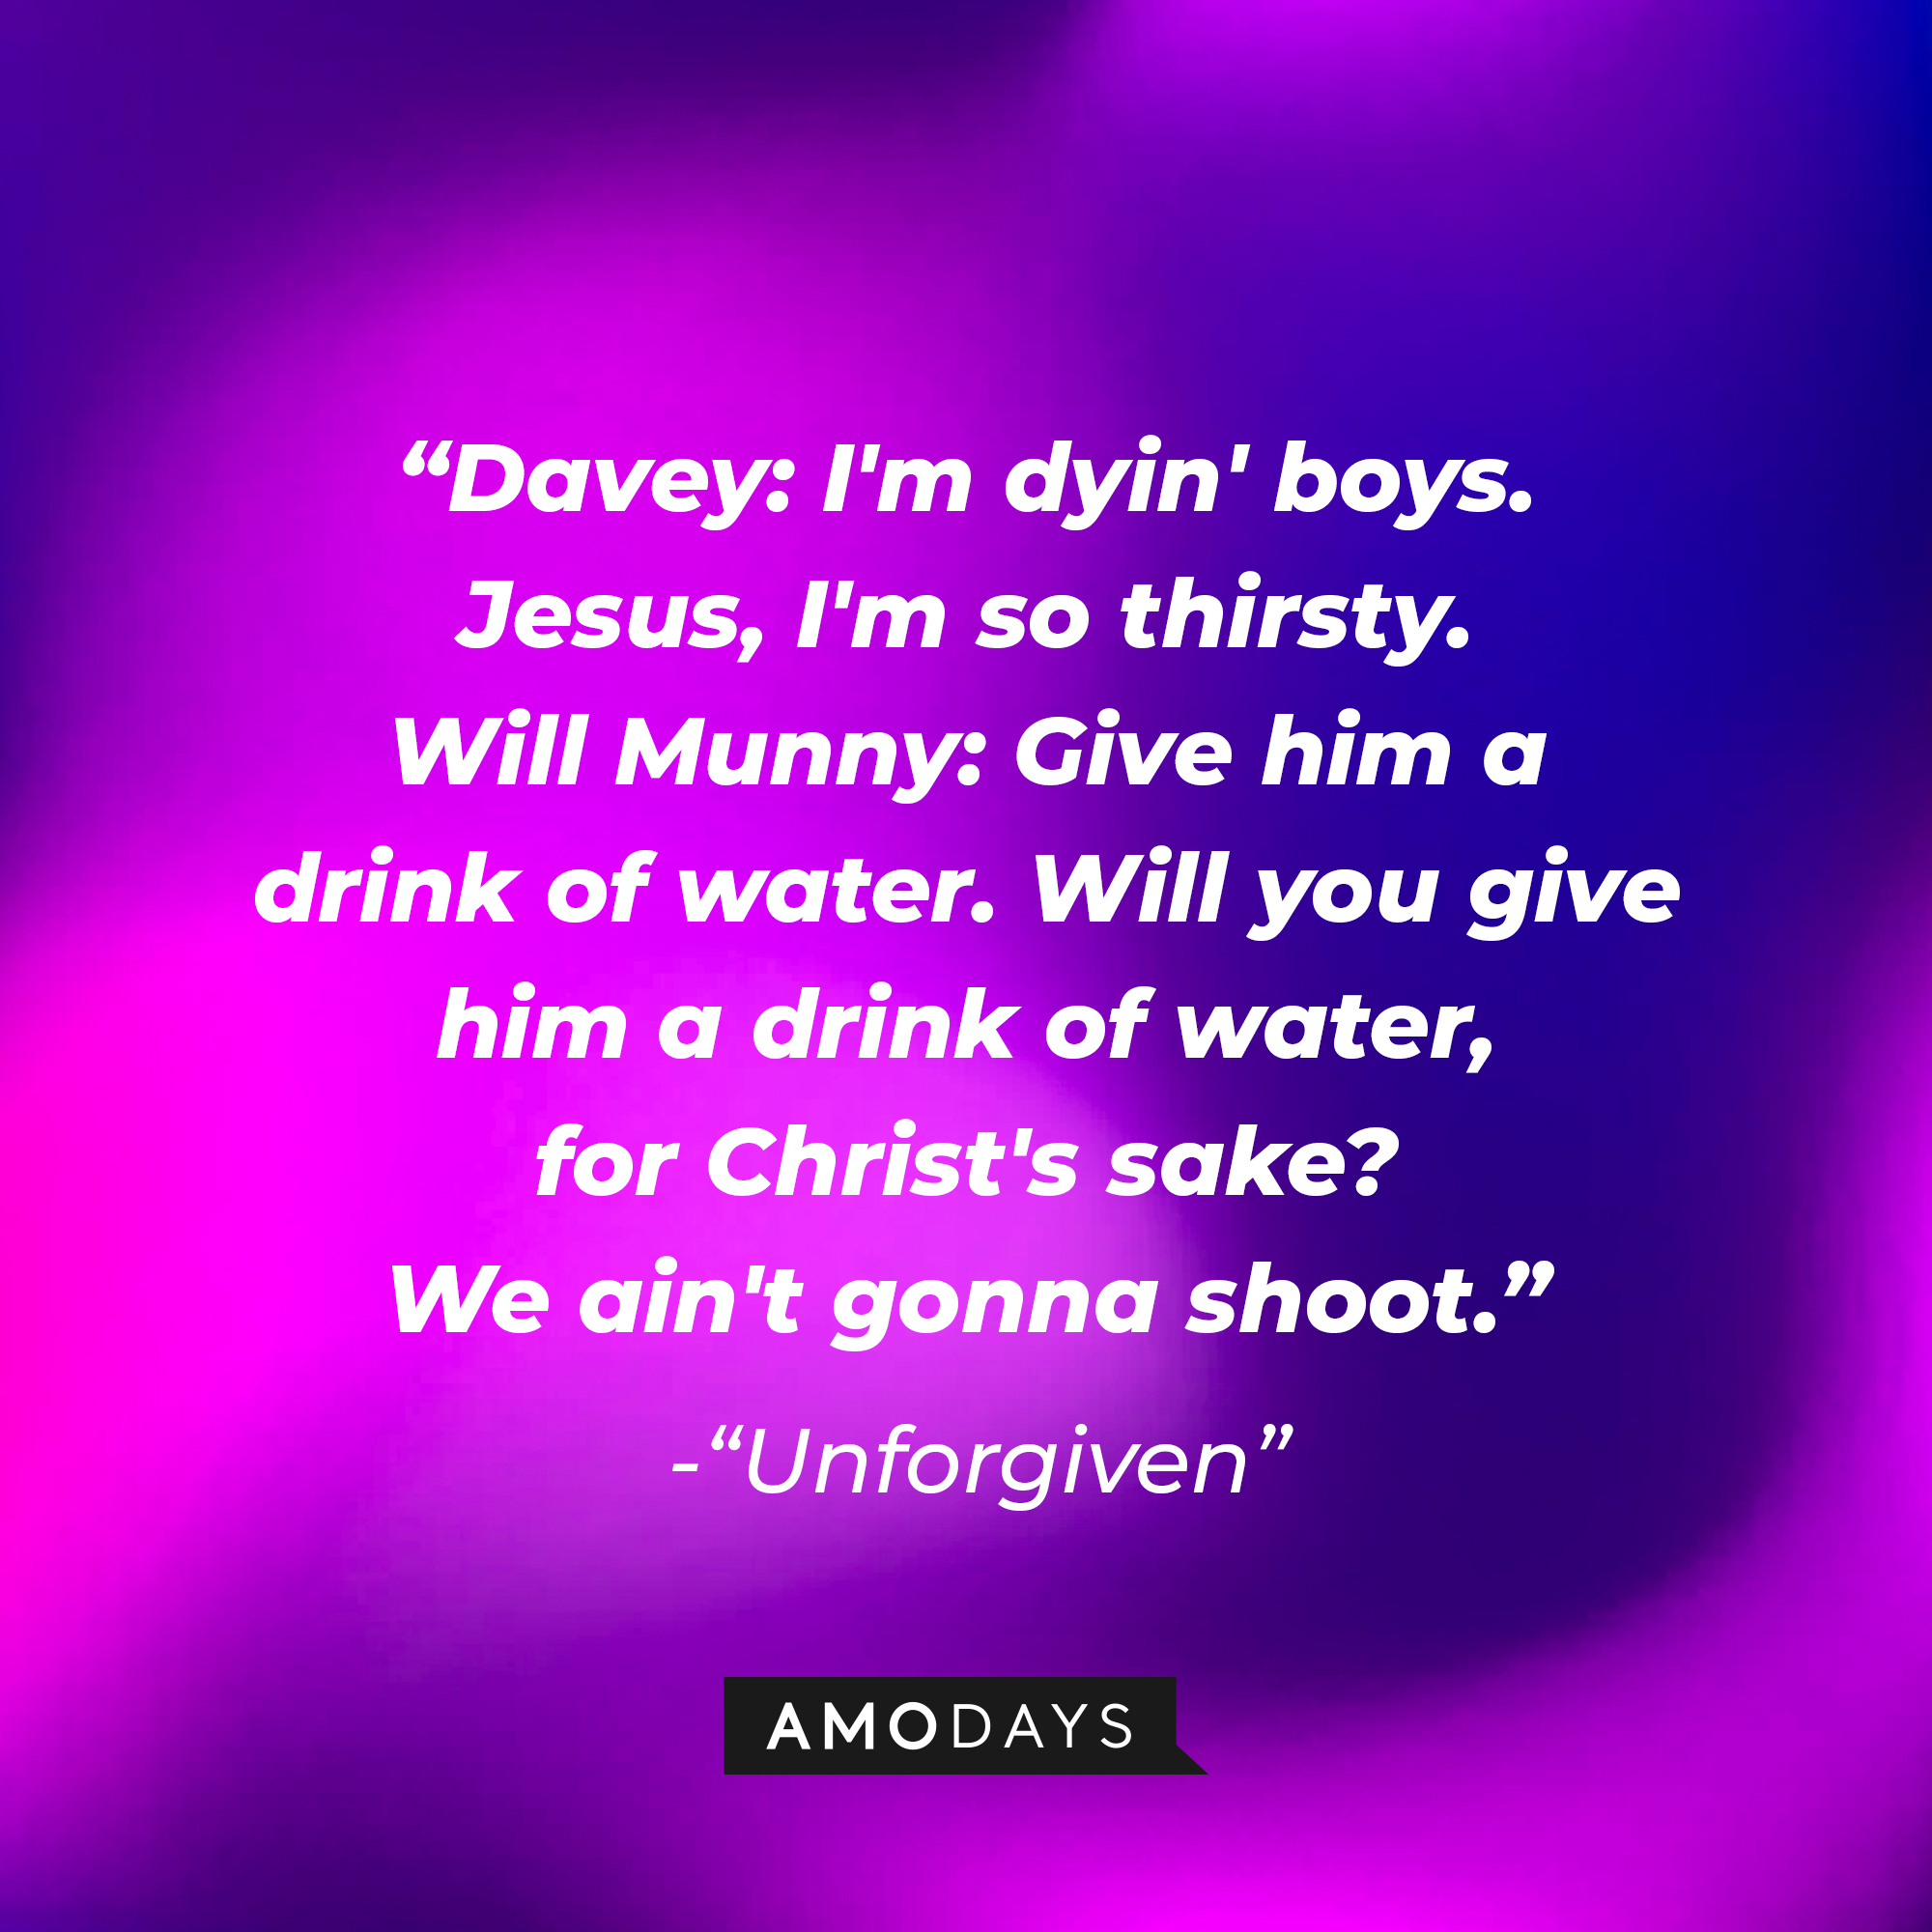 Davey and William Munny's dialogue in "Unforgiven:" "Davey: I'm dyin' boys. Jesus, I'm so thirsty. Will Munny: Give him a drink of water. Will you give him a drink of water, for Christ's sake? We ain't gonna shoot." | Source: AmoDays